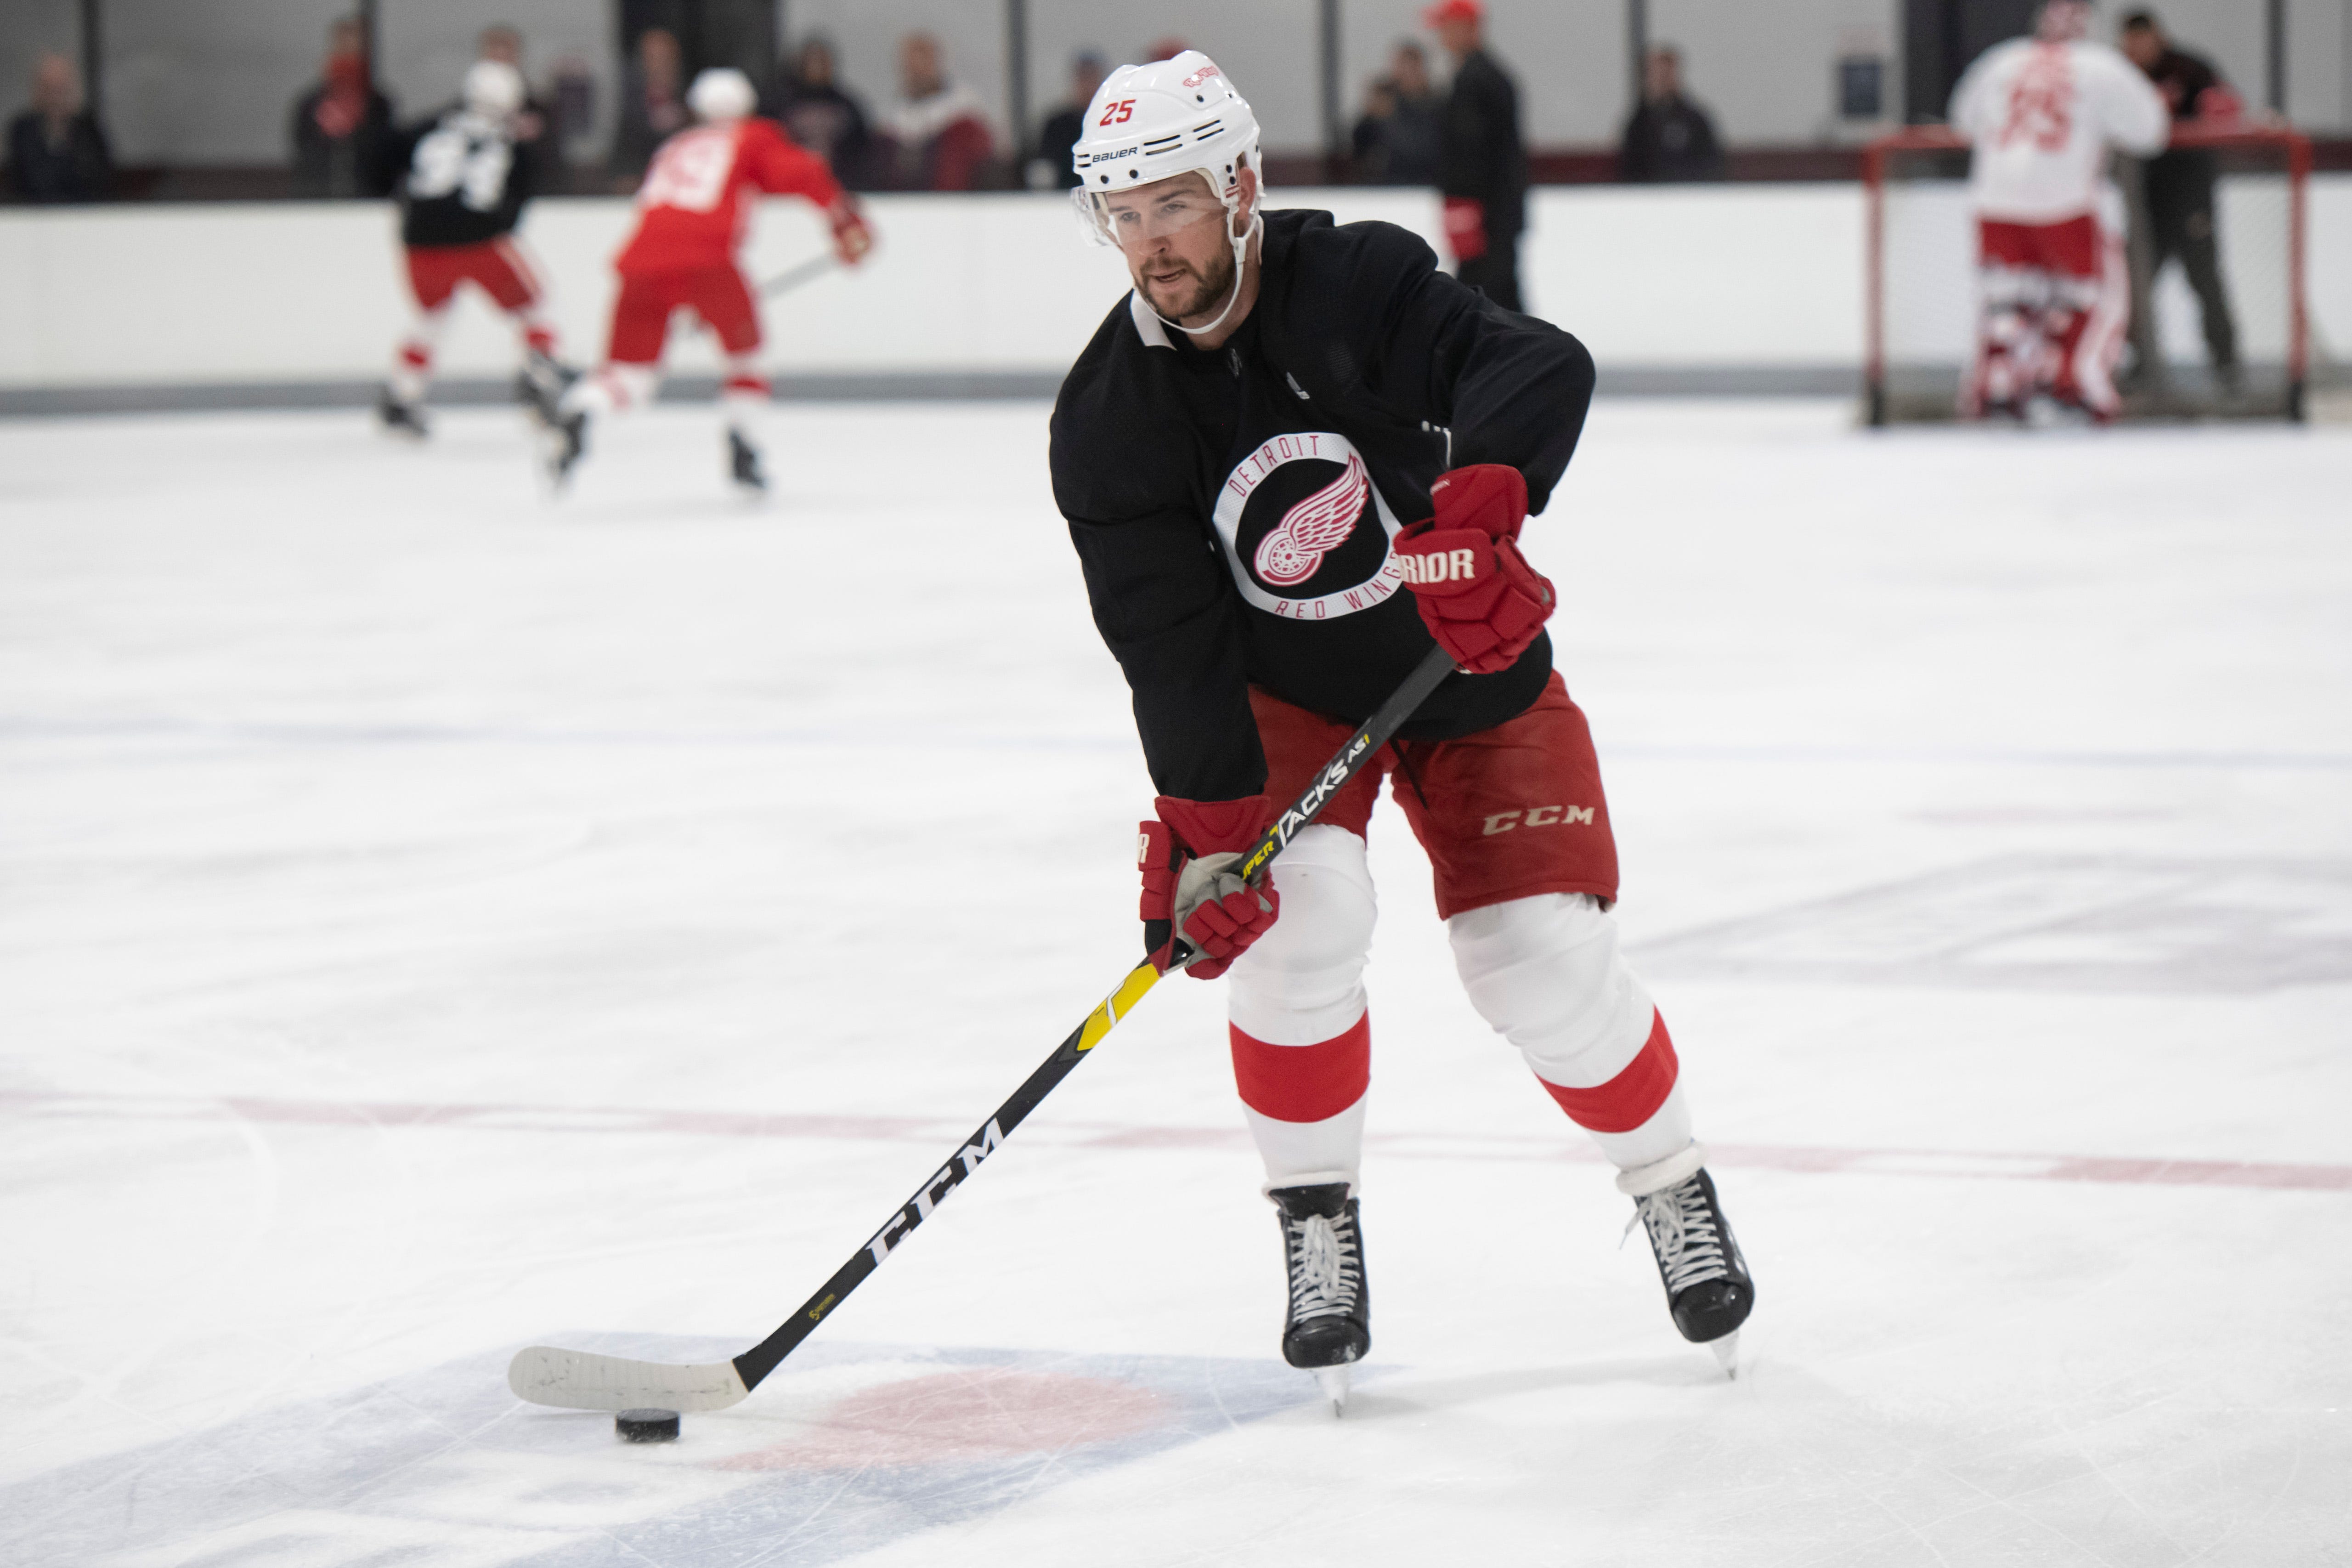 MIKE GREEN: AGE: 33 (Oct. 12). HT: 6-1. WT: 207. STATS:  66 games, 8 goals, 25 assists, 33 points. ANALYSIS: Was recovering from neck surgery when an infection sent Green off the ice. Green was re-signed to a two-year contract to provide offense from the back end.